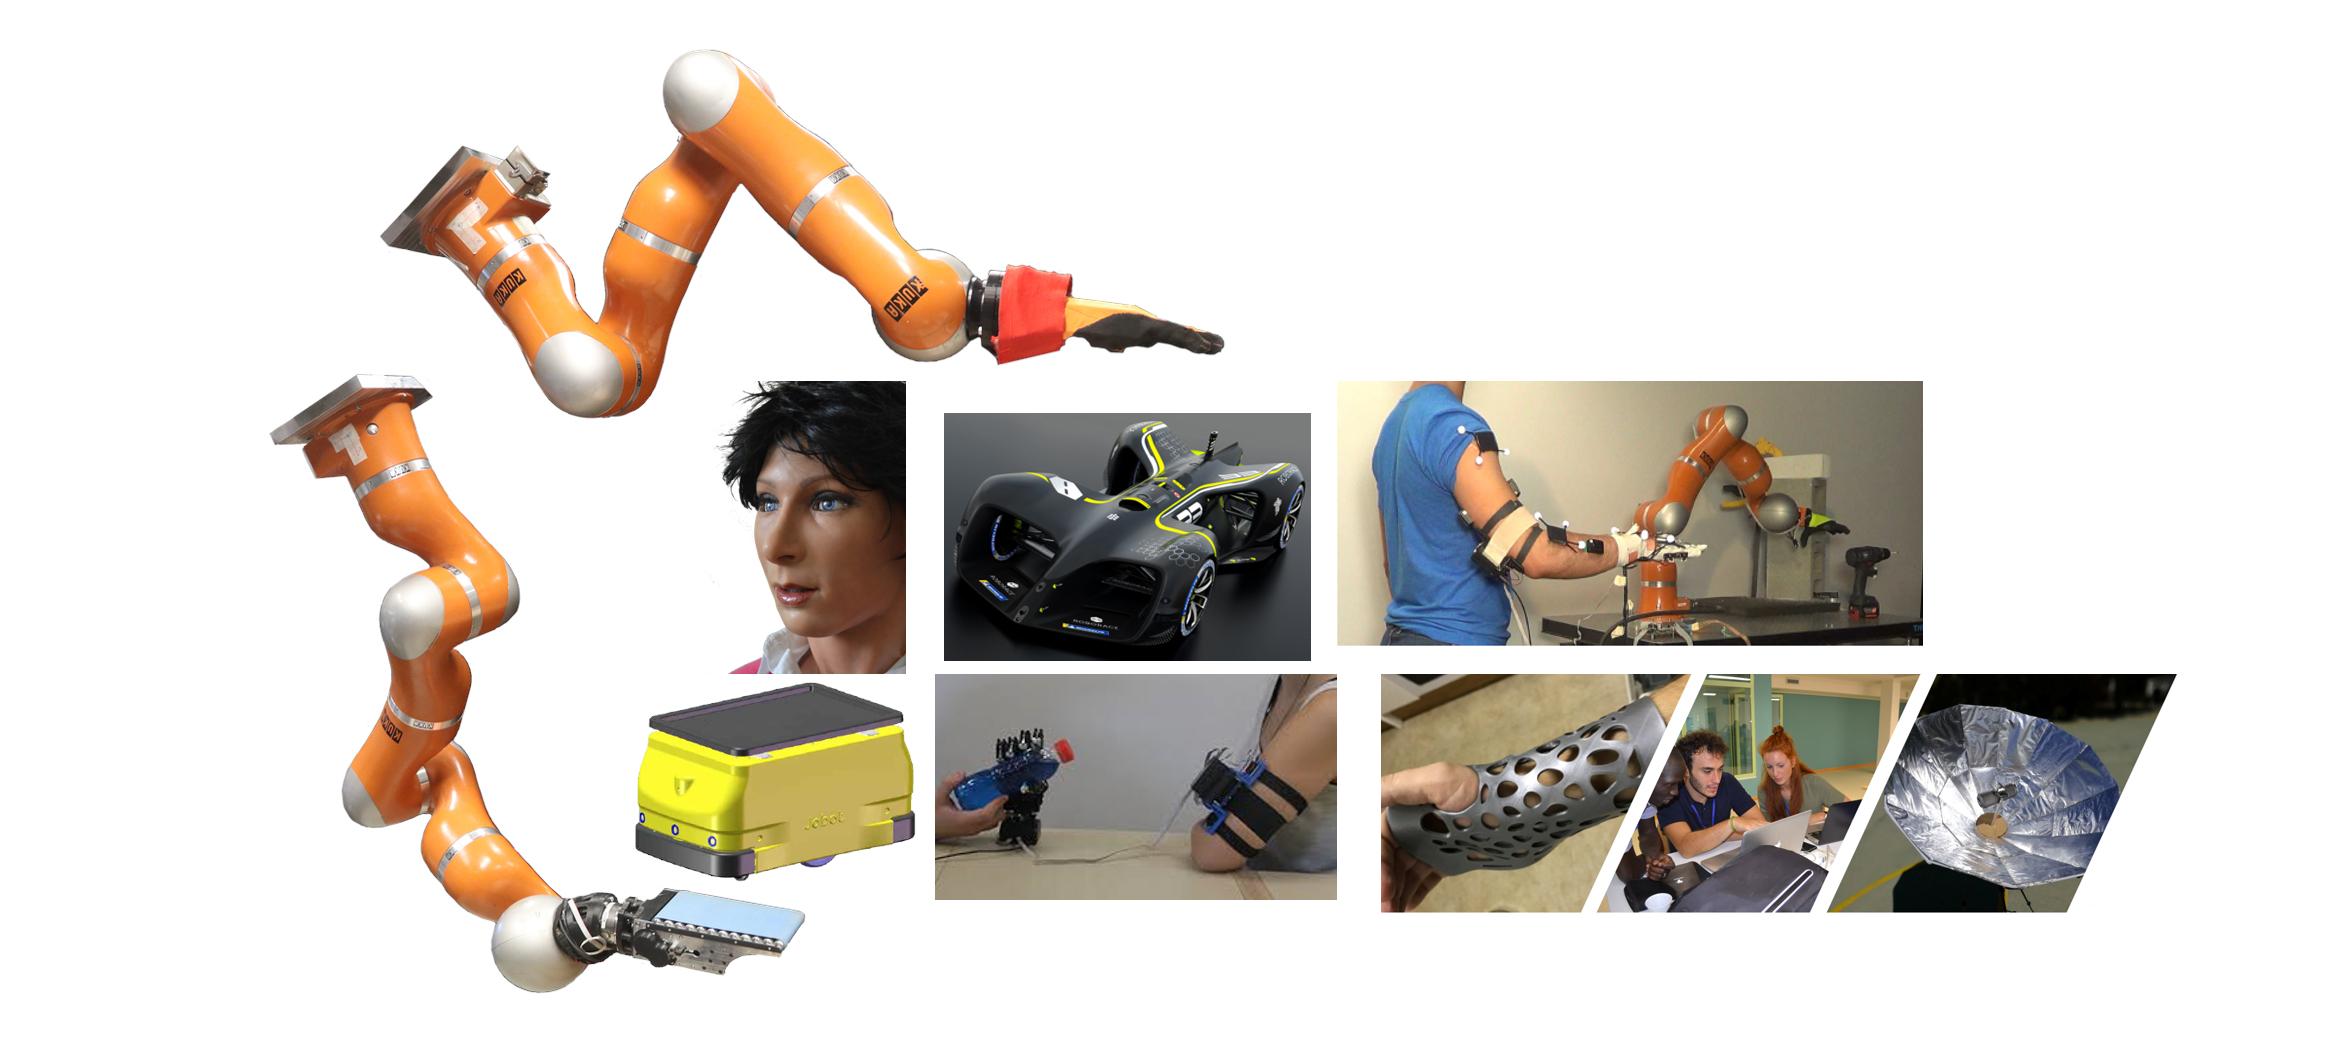 Intelligent mechatronic systems for humans and industry